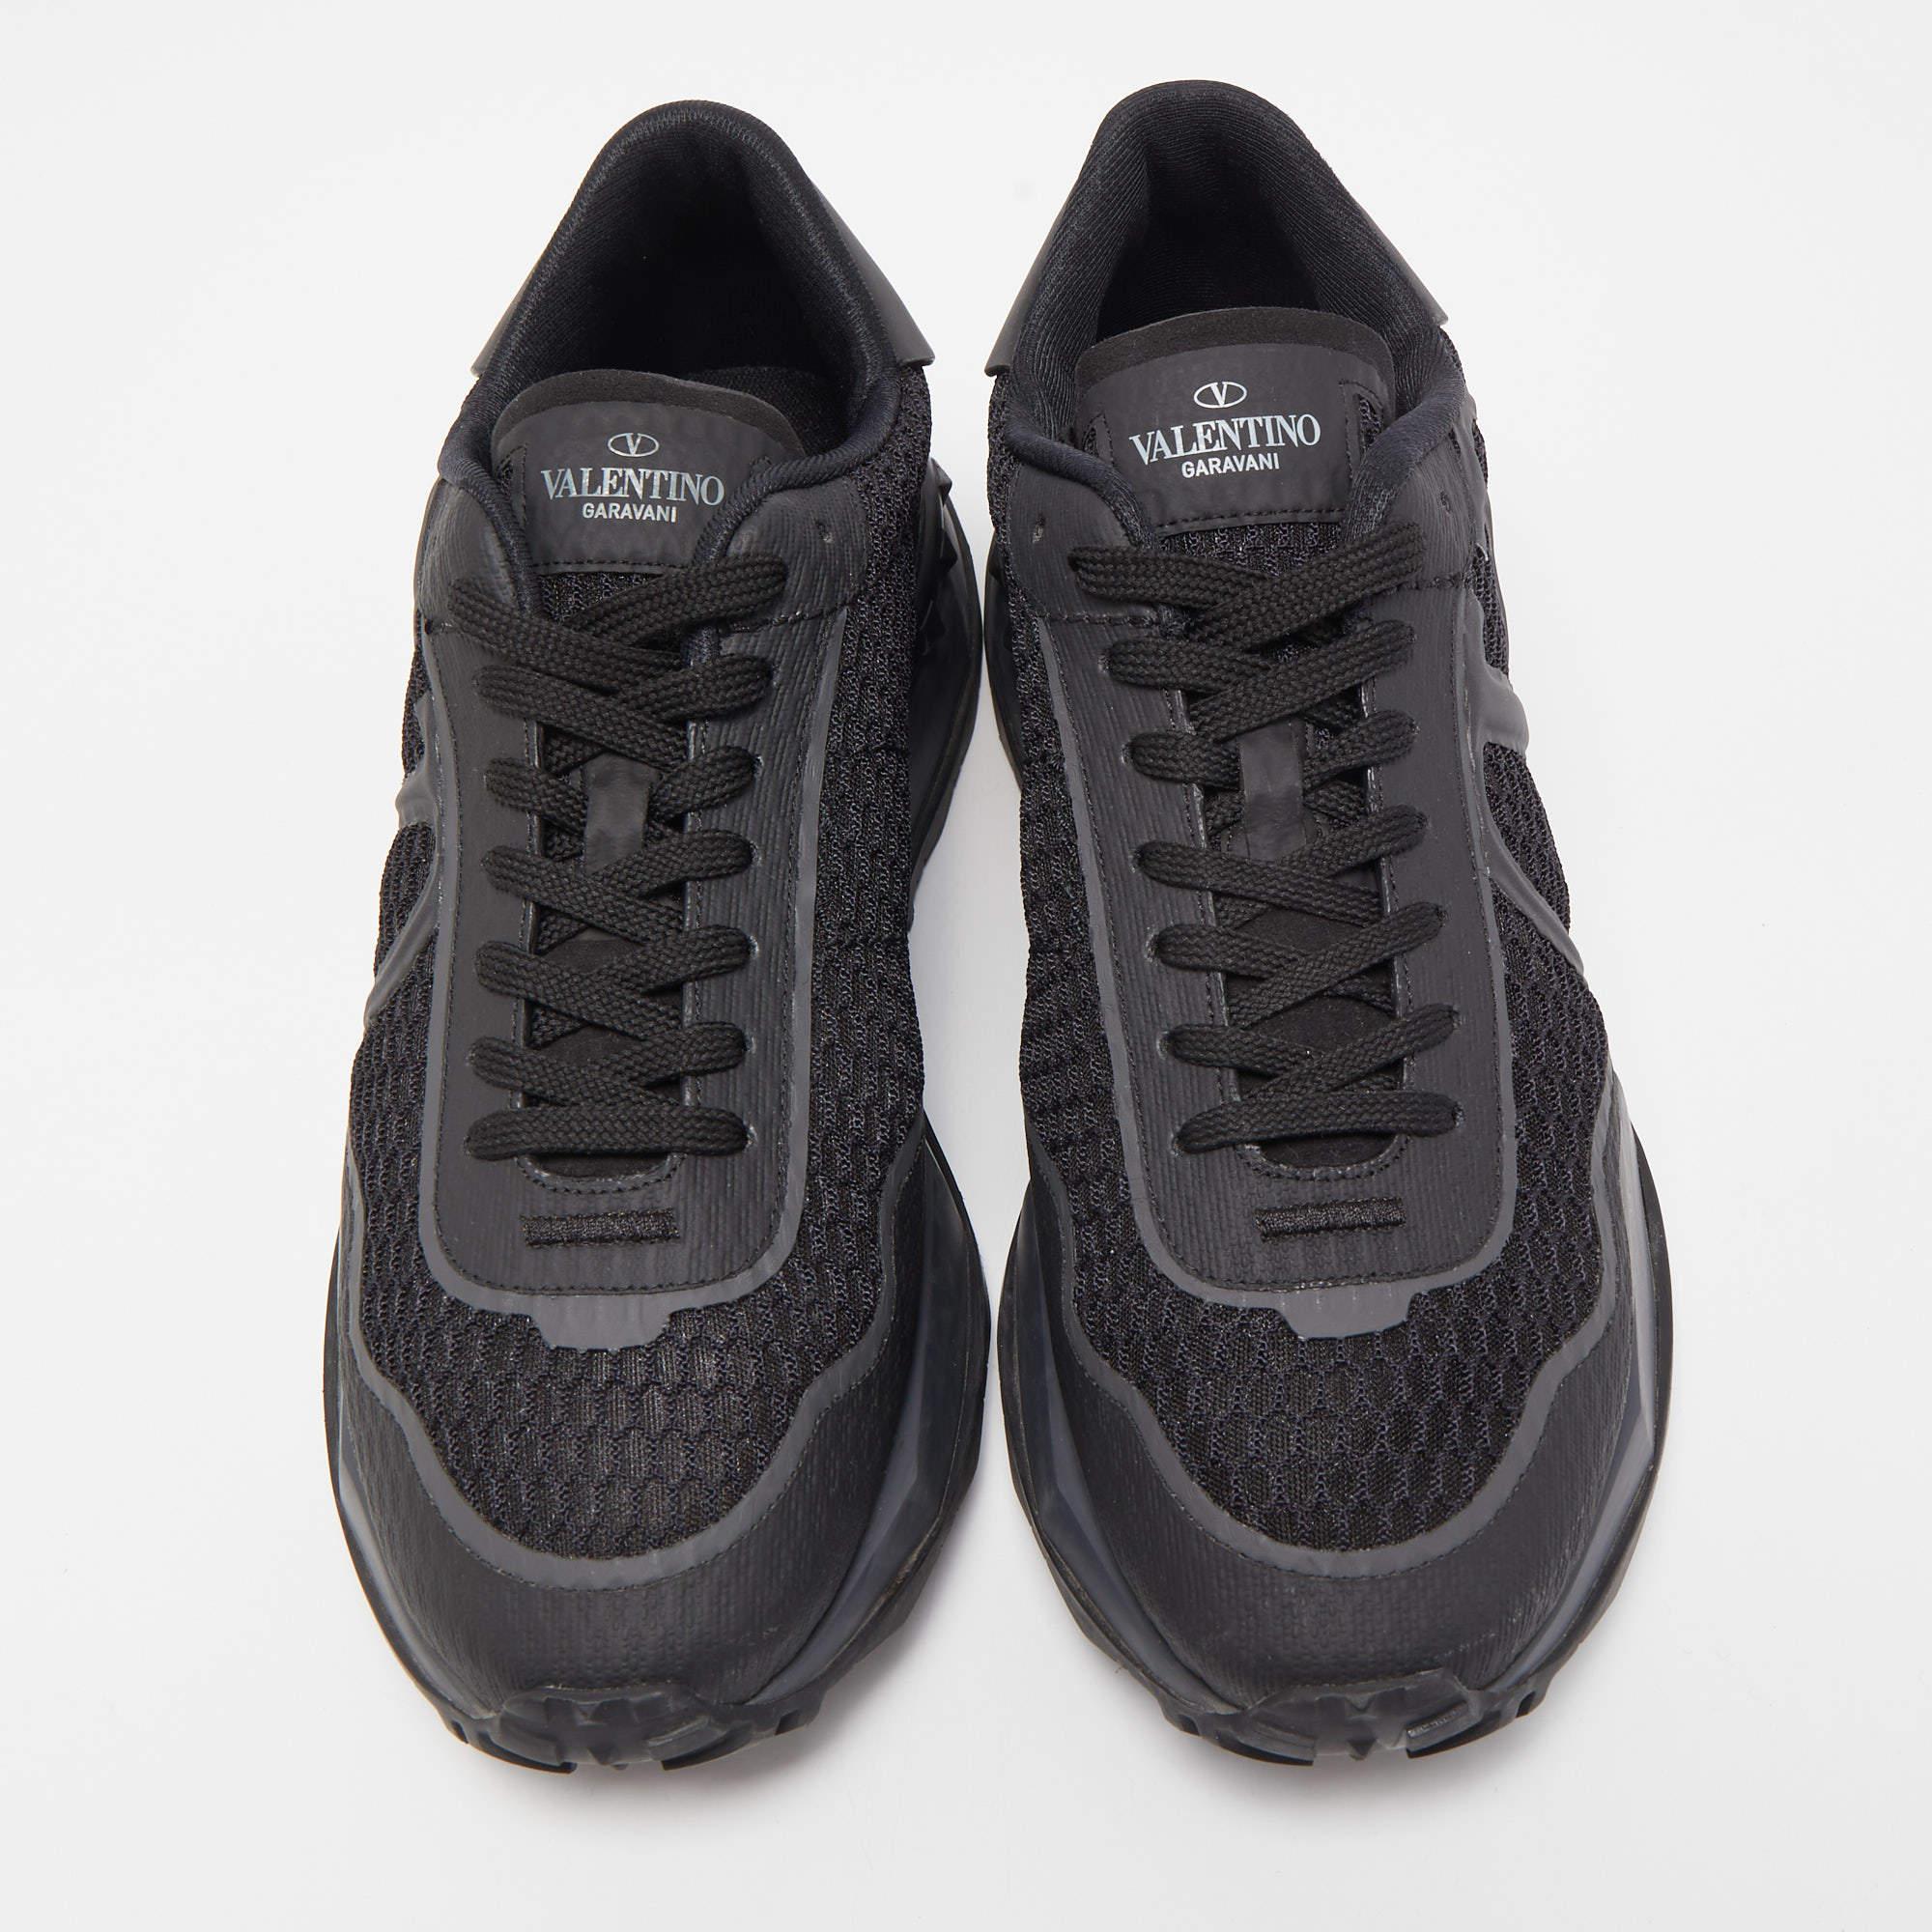 Add a statement appeal to your outfit with these sneakers. Made from premium materials, they feature lace-up vamps and relaxing footbeds. The rubber sole of this pair aims to provide you with everyday ease.

Includes: Extra lace, Original Dustbag,